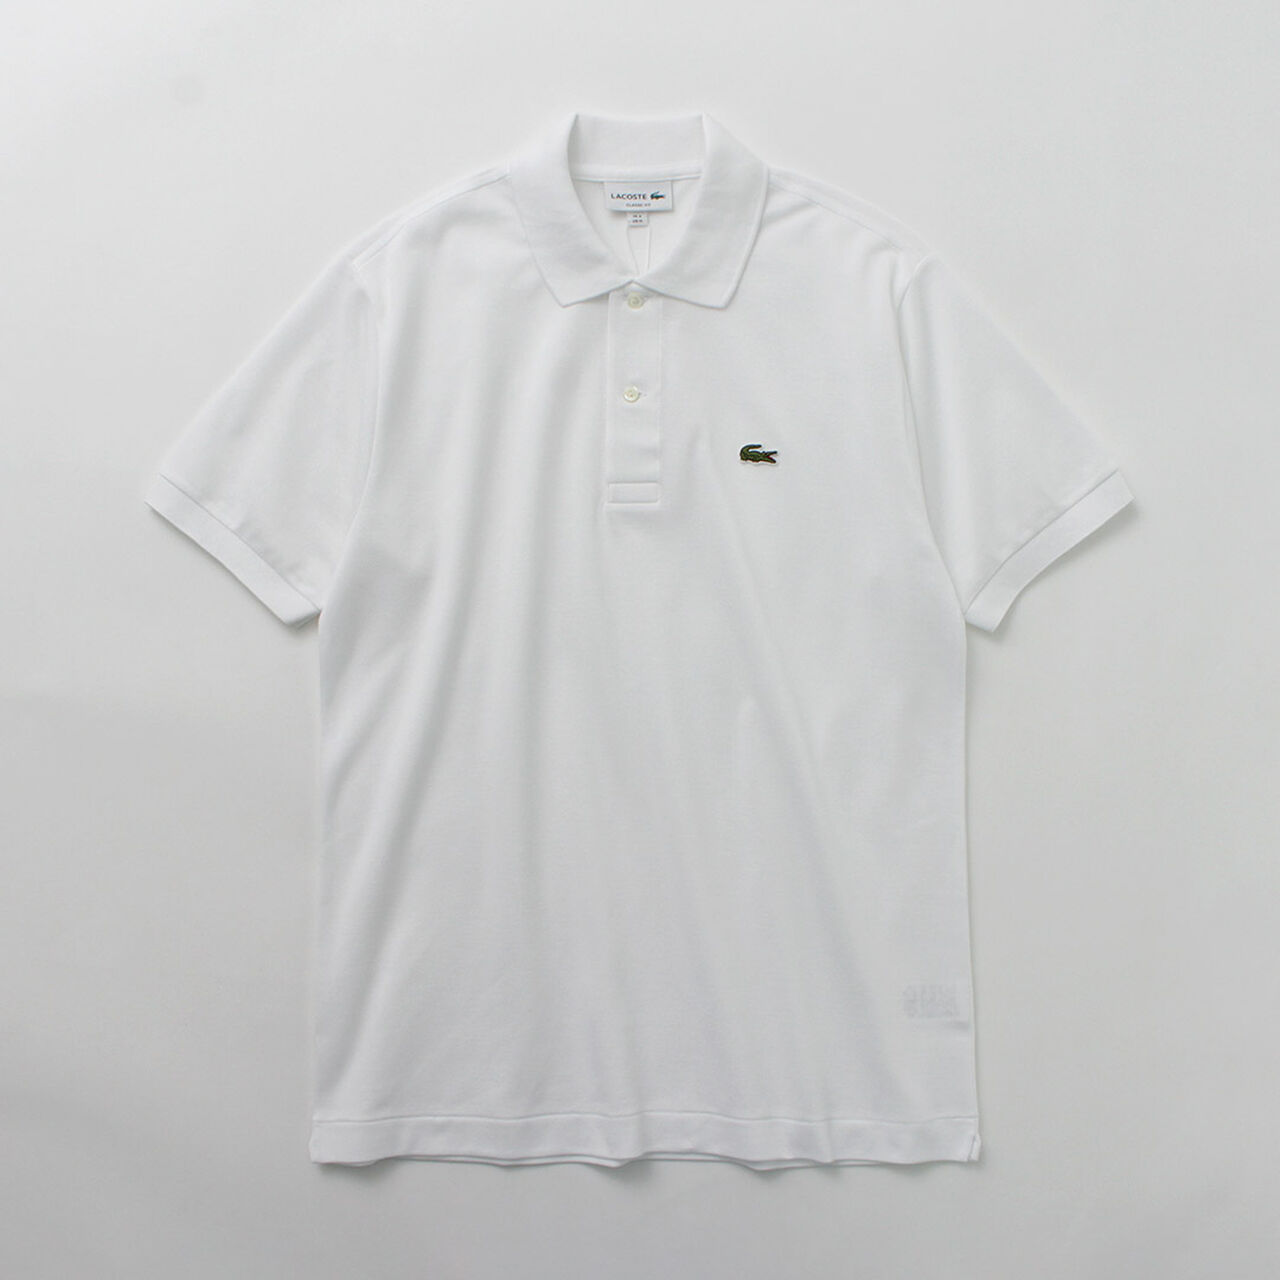 L.12.12 Made in Japan Polo shirt,, large image number 0